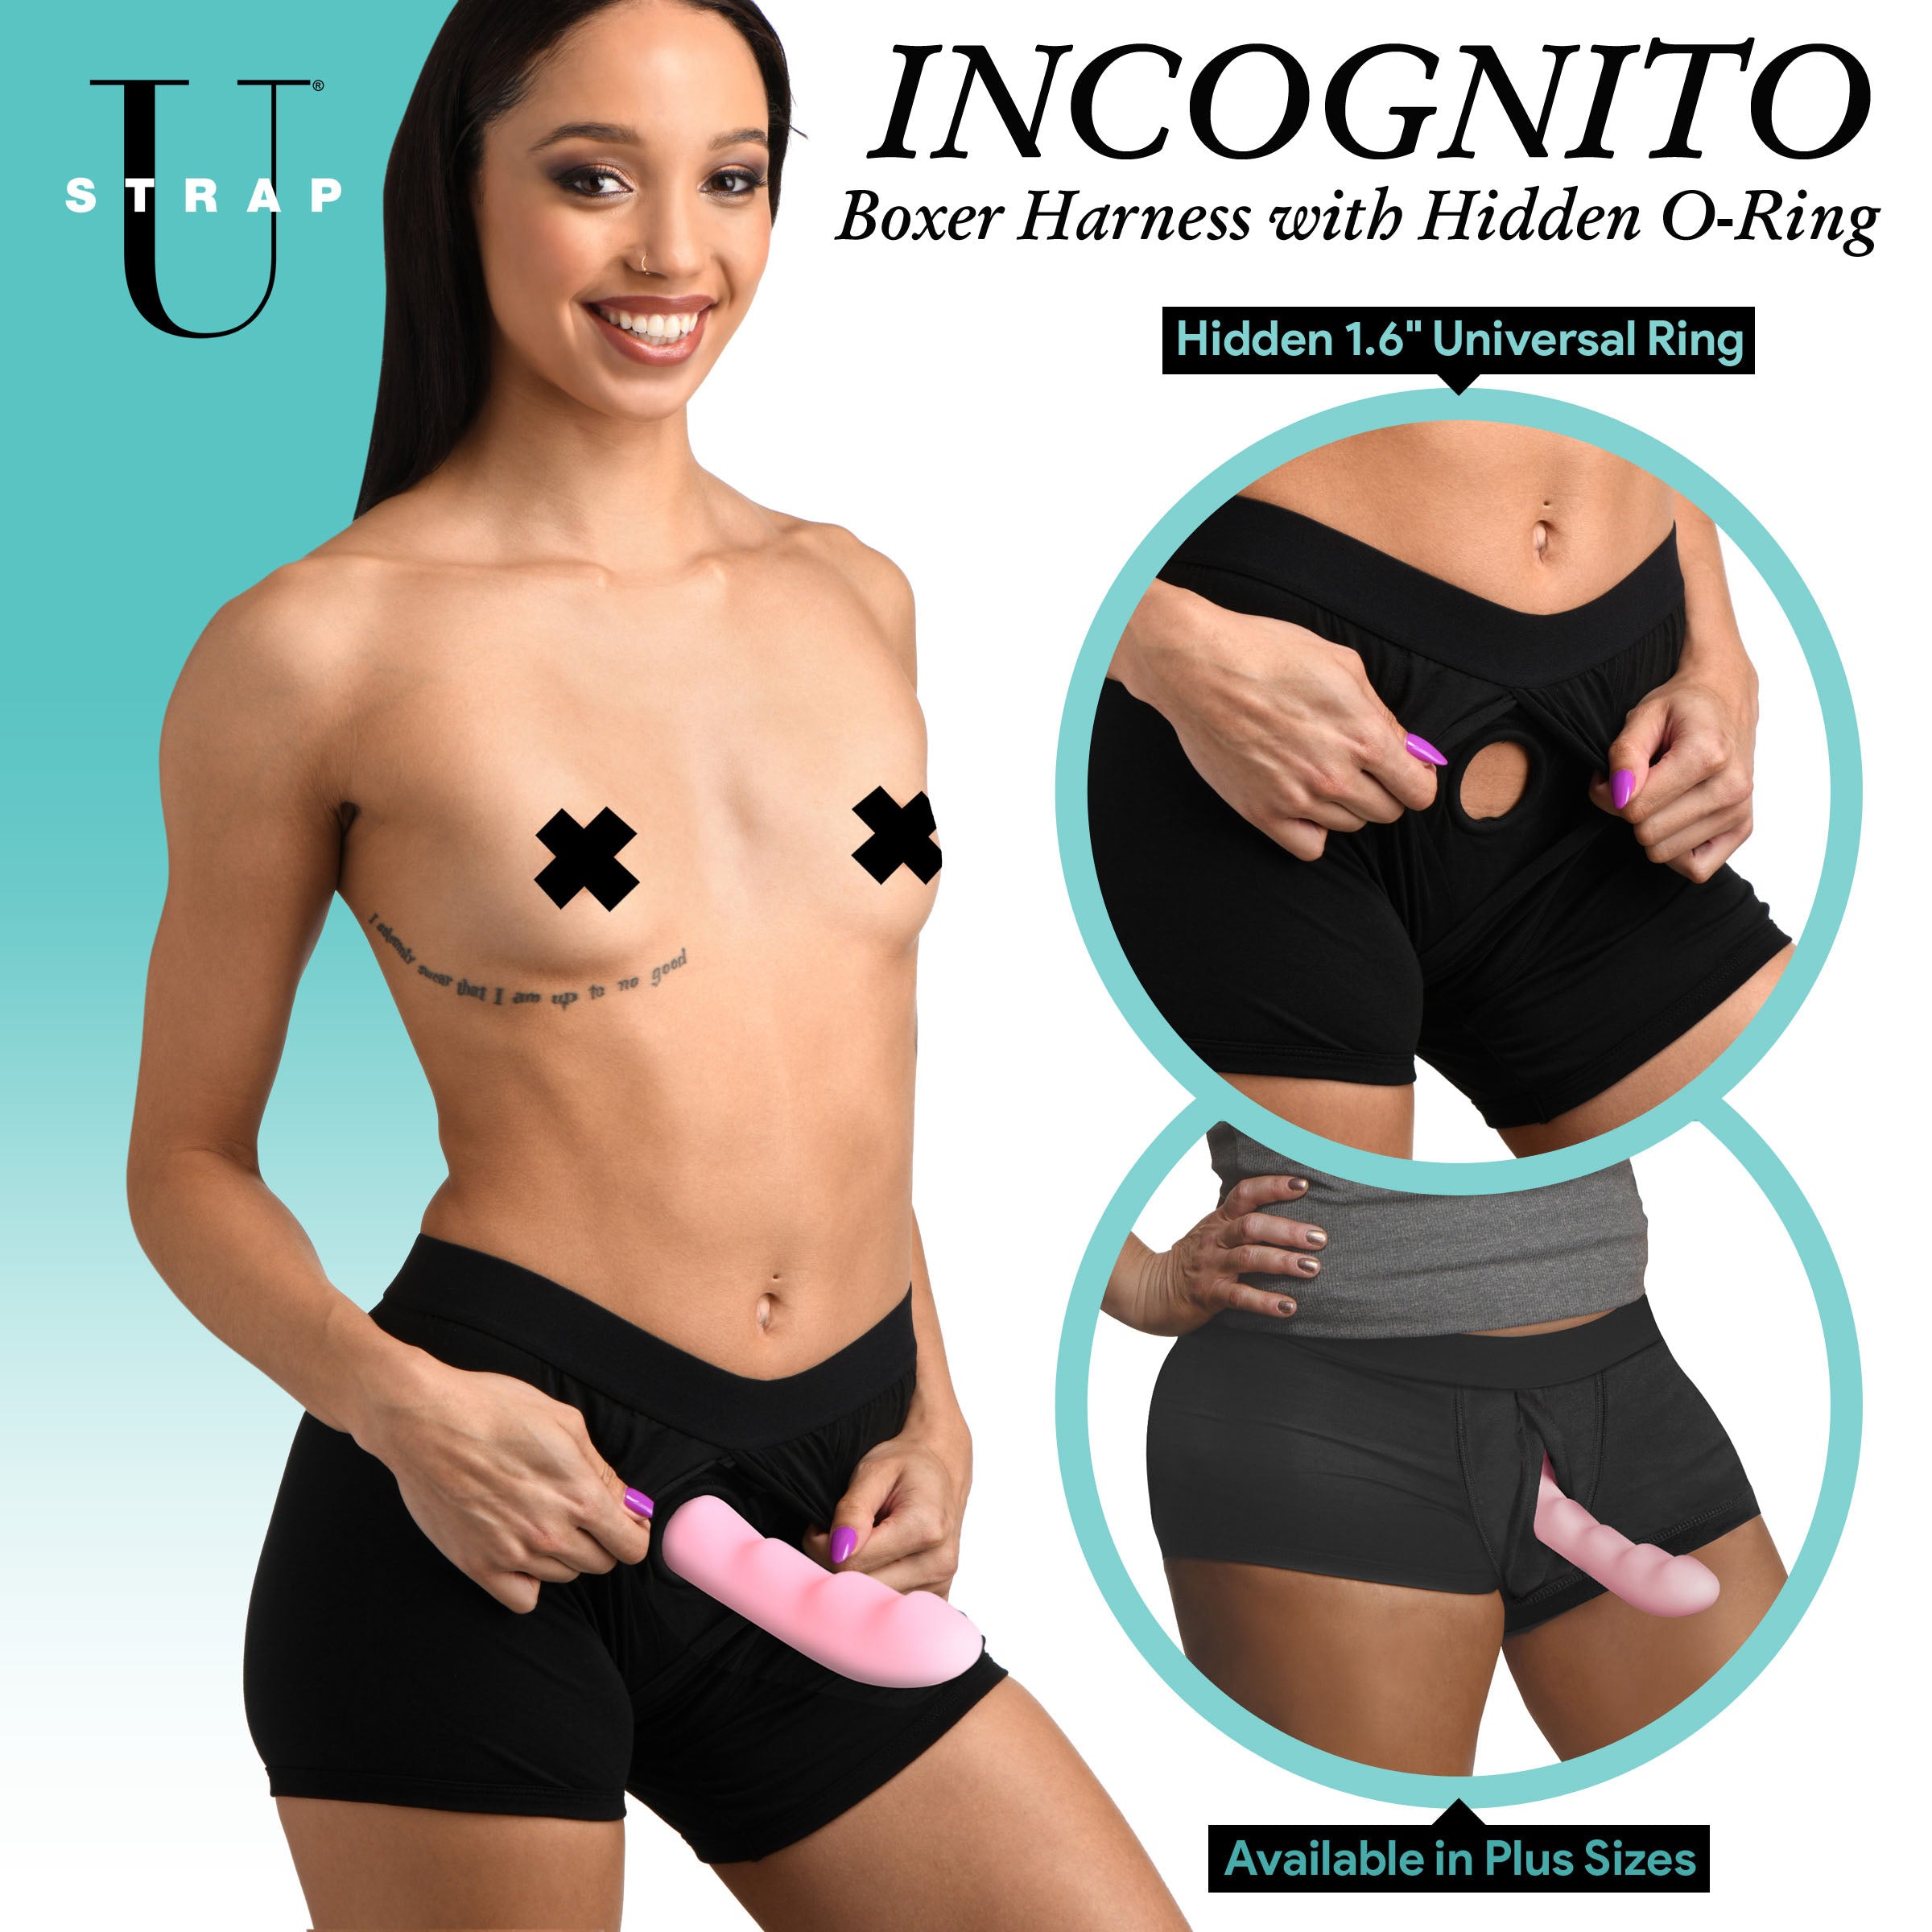 Incognito Boxer Harness with Hidden O-Ring 2XL